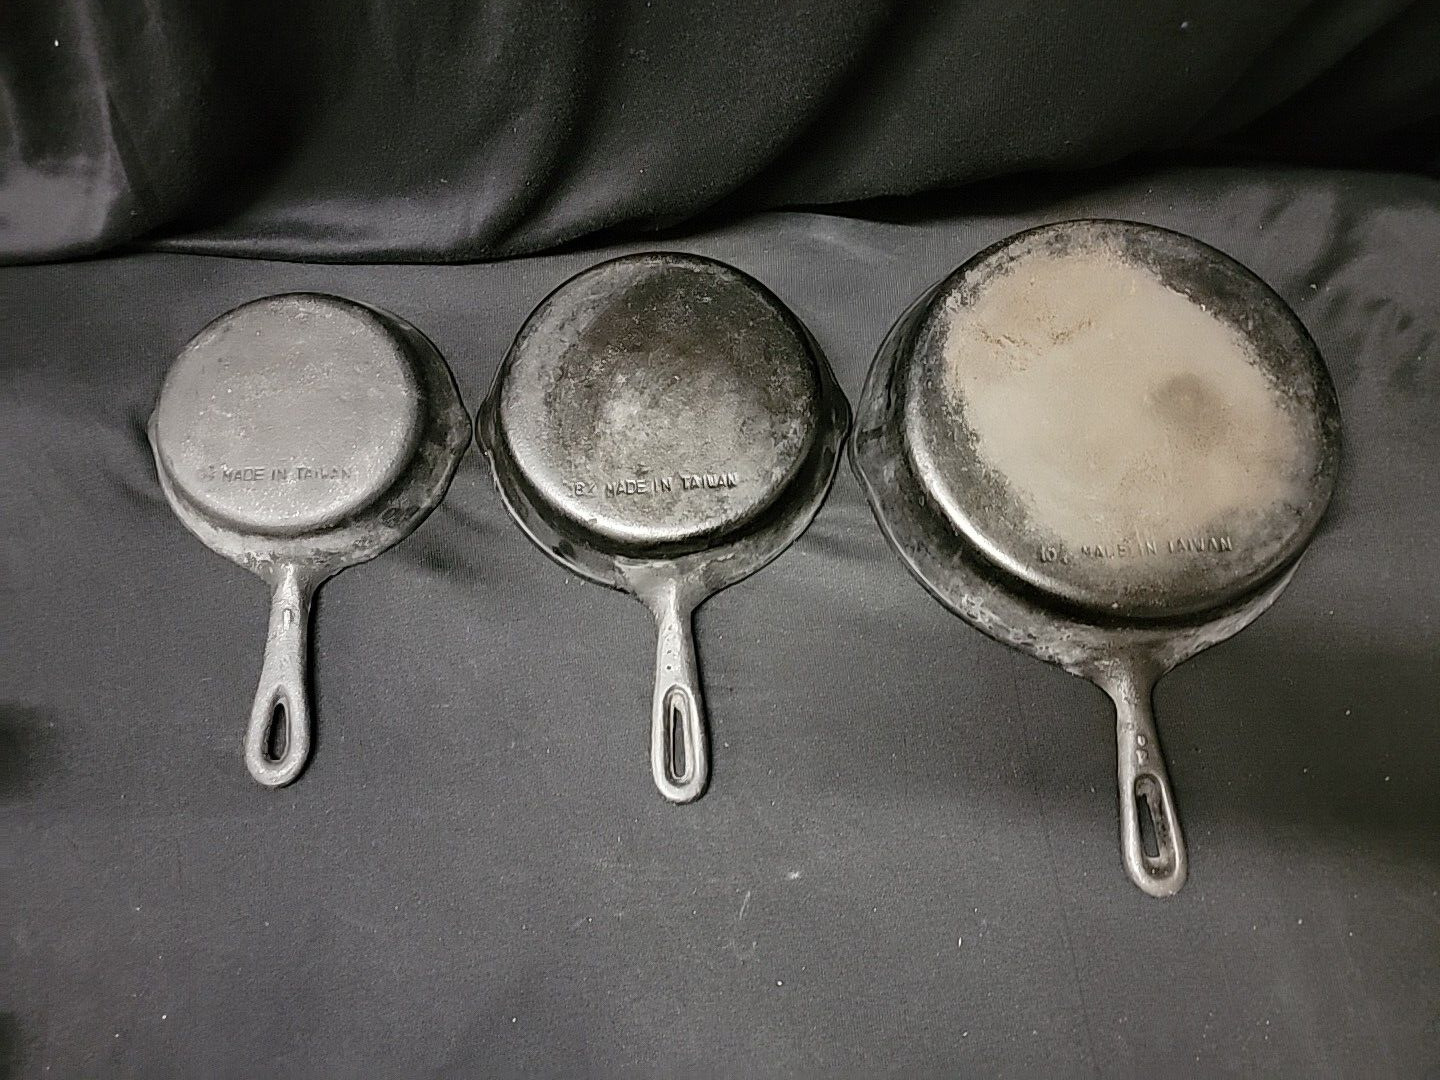 Lot of 3 Vintage Made in Taiwan Cast Iron Skillets 10 1/2, 8 and 6 1/2 inches